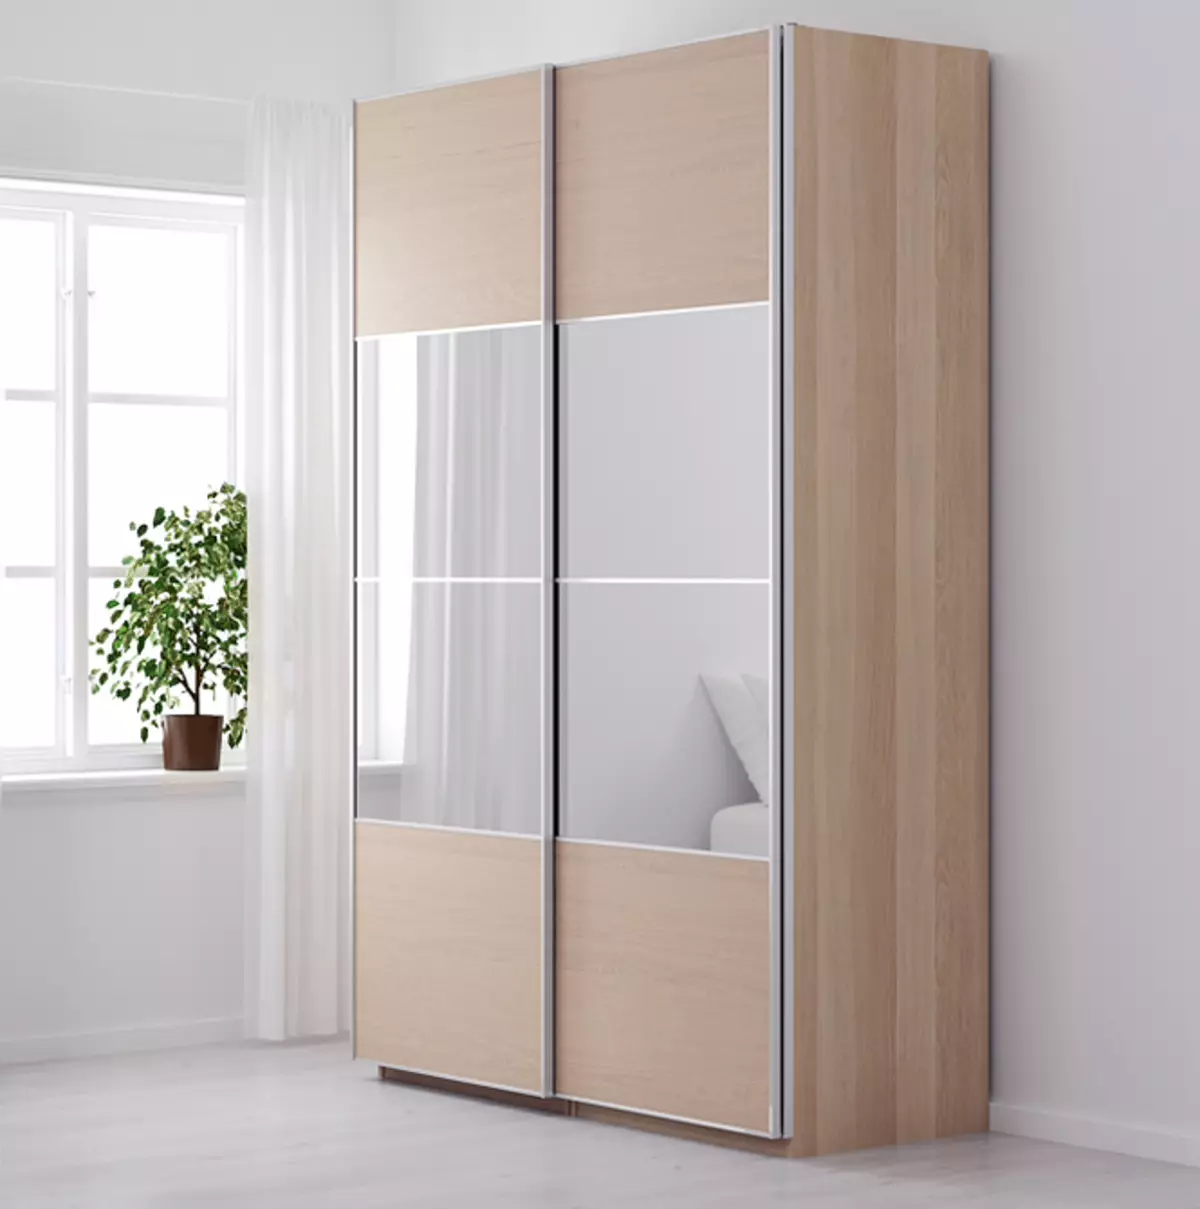 Modern wardrobes in the bedroom: photo and instruction, how to locate them 10044_15